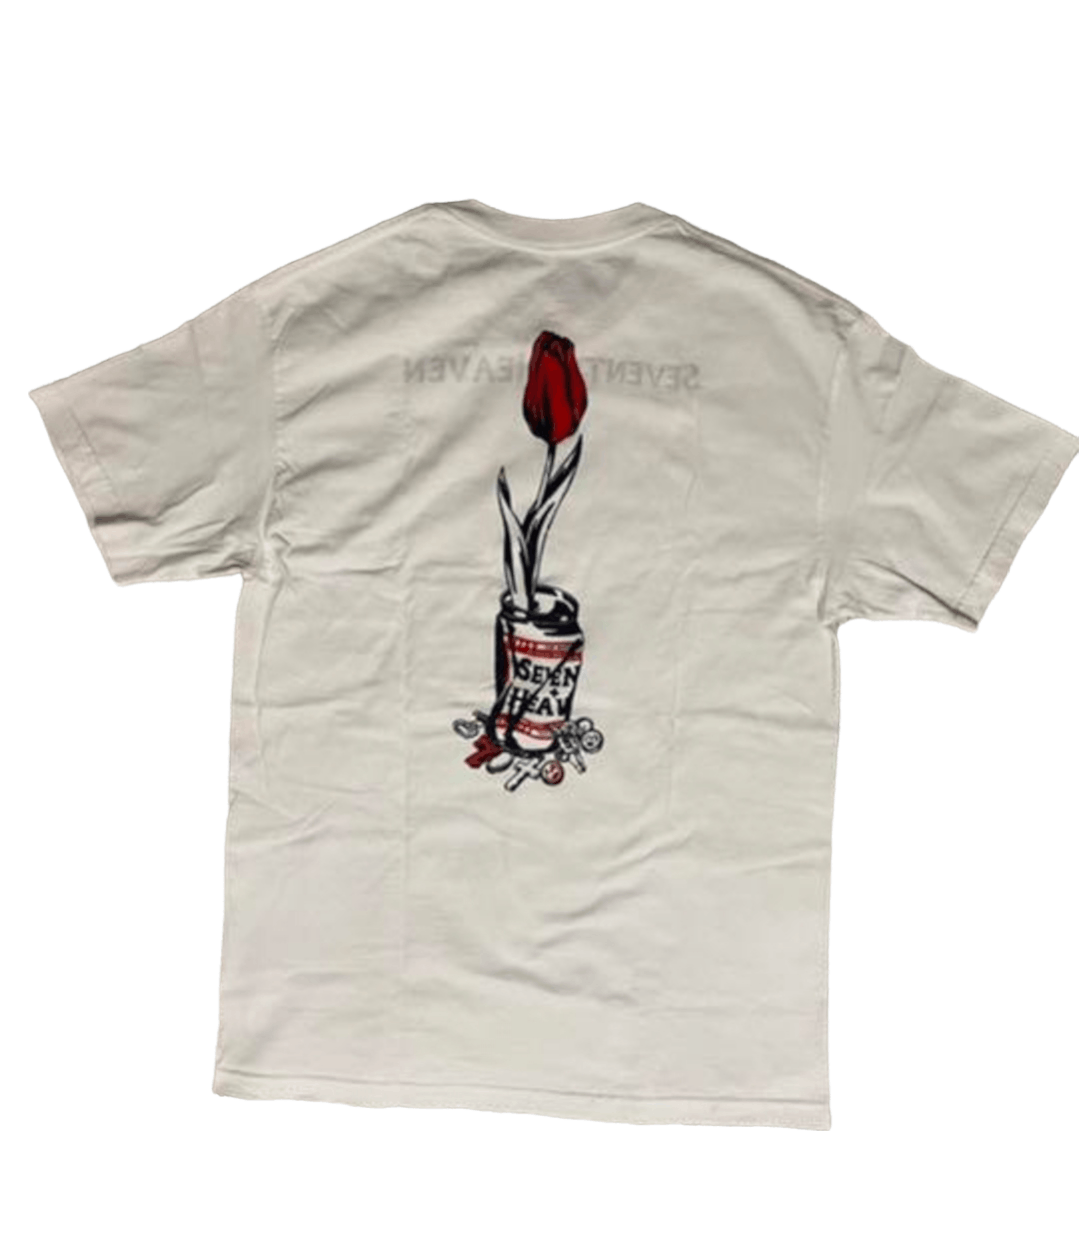 Seventh Heaven Seventh Heaven Wasted Youth Tee | Grailed